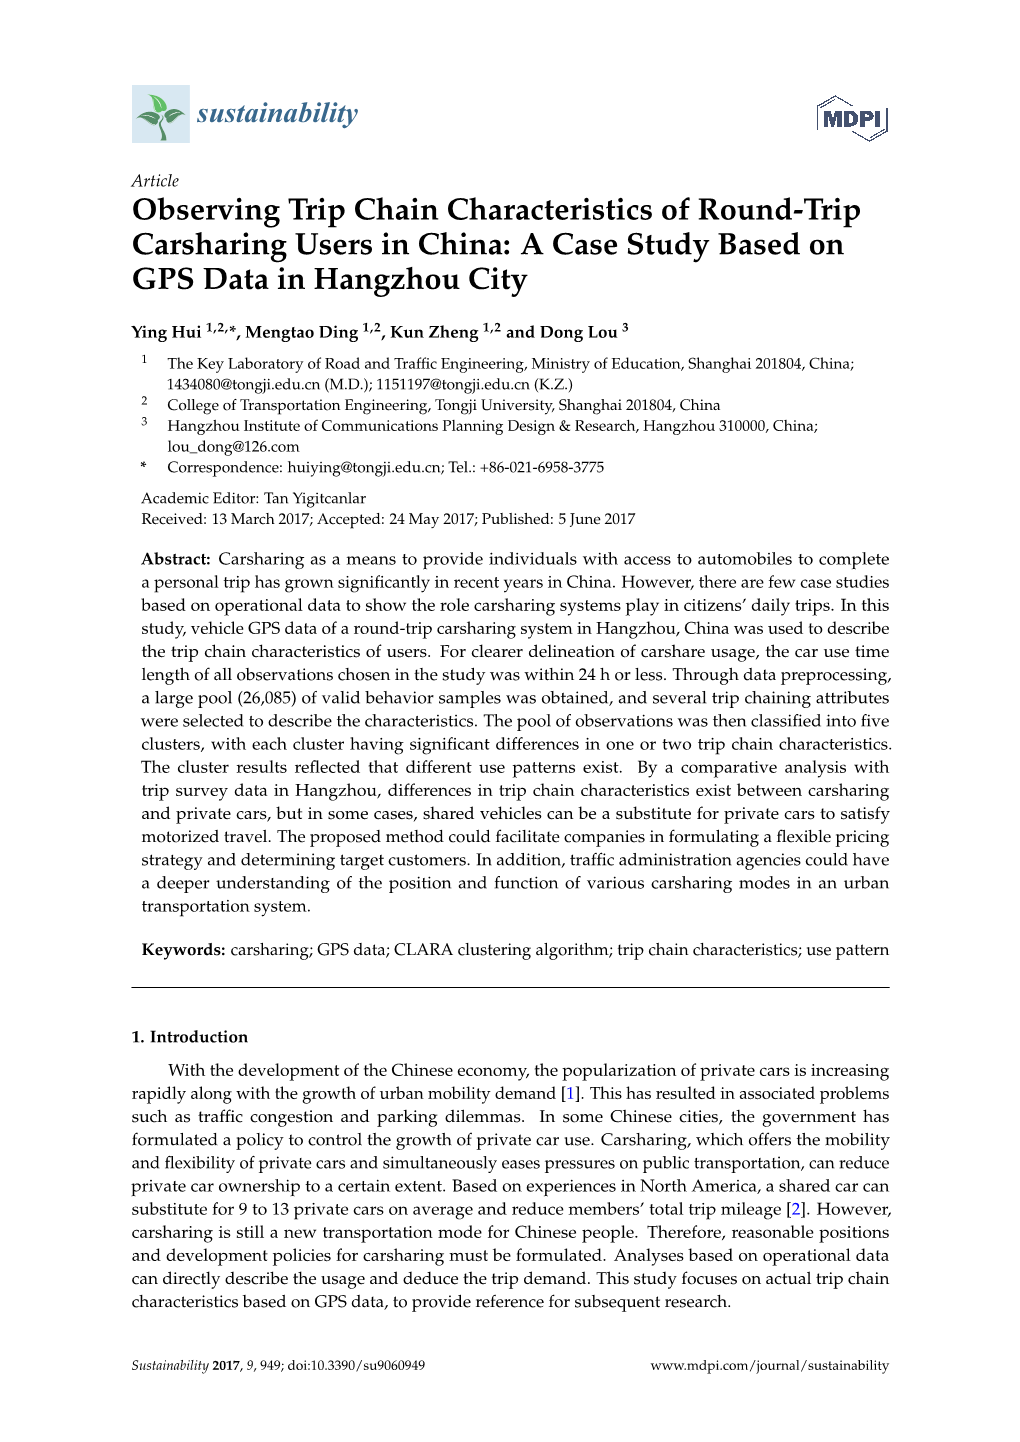 Observing Trip Chain Characteristics of Round-Trip Carsharing Users in China: a Case Study Based on GPS Data in Hangzhou City